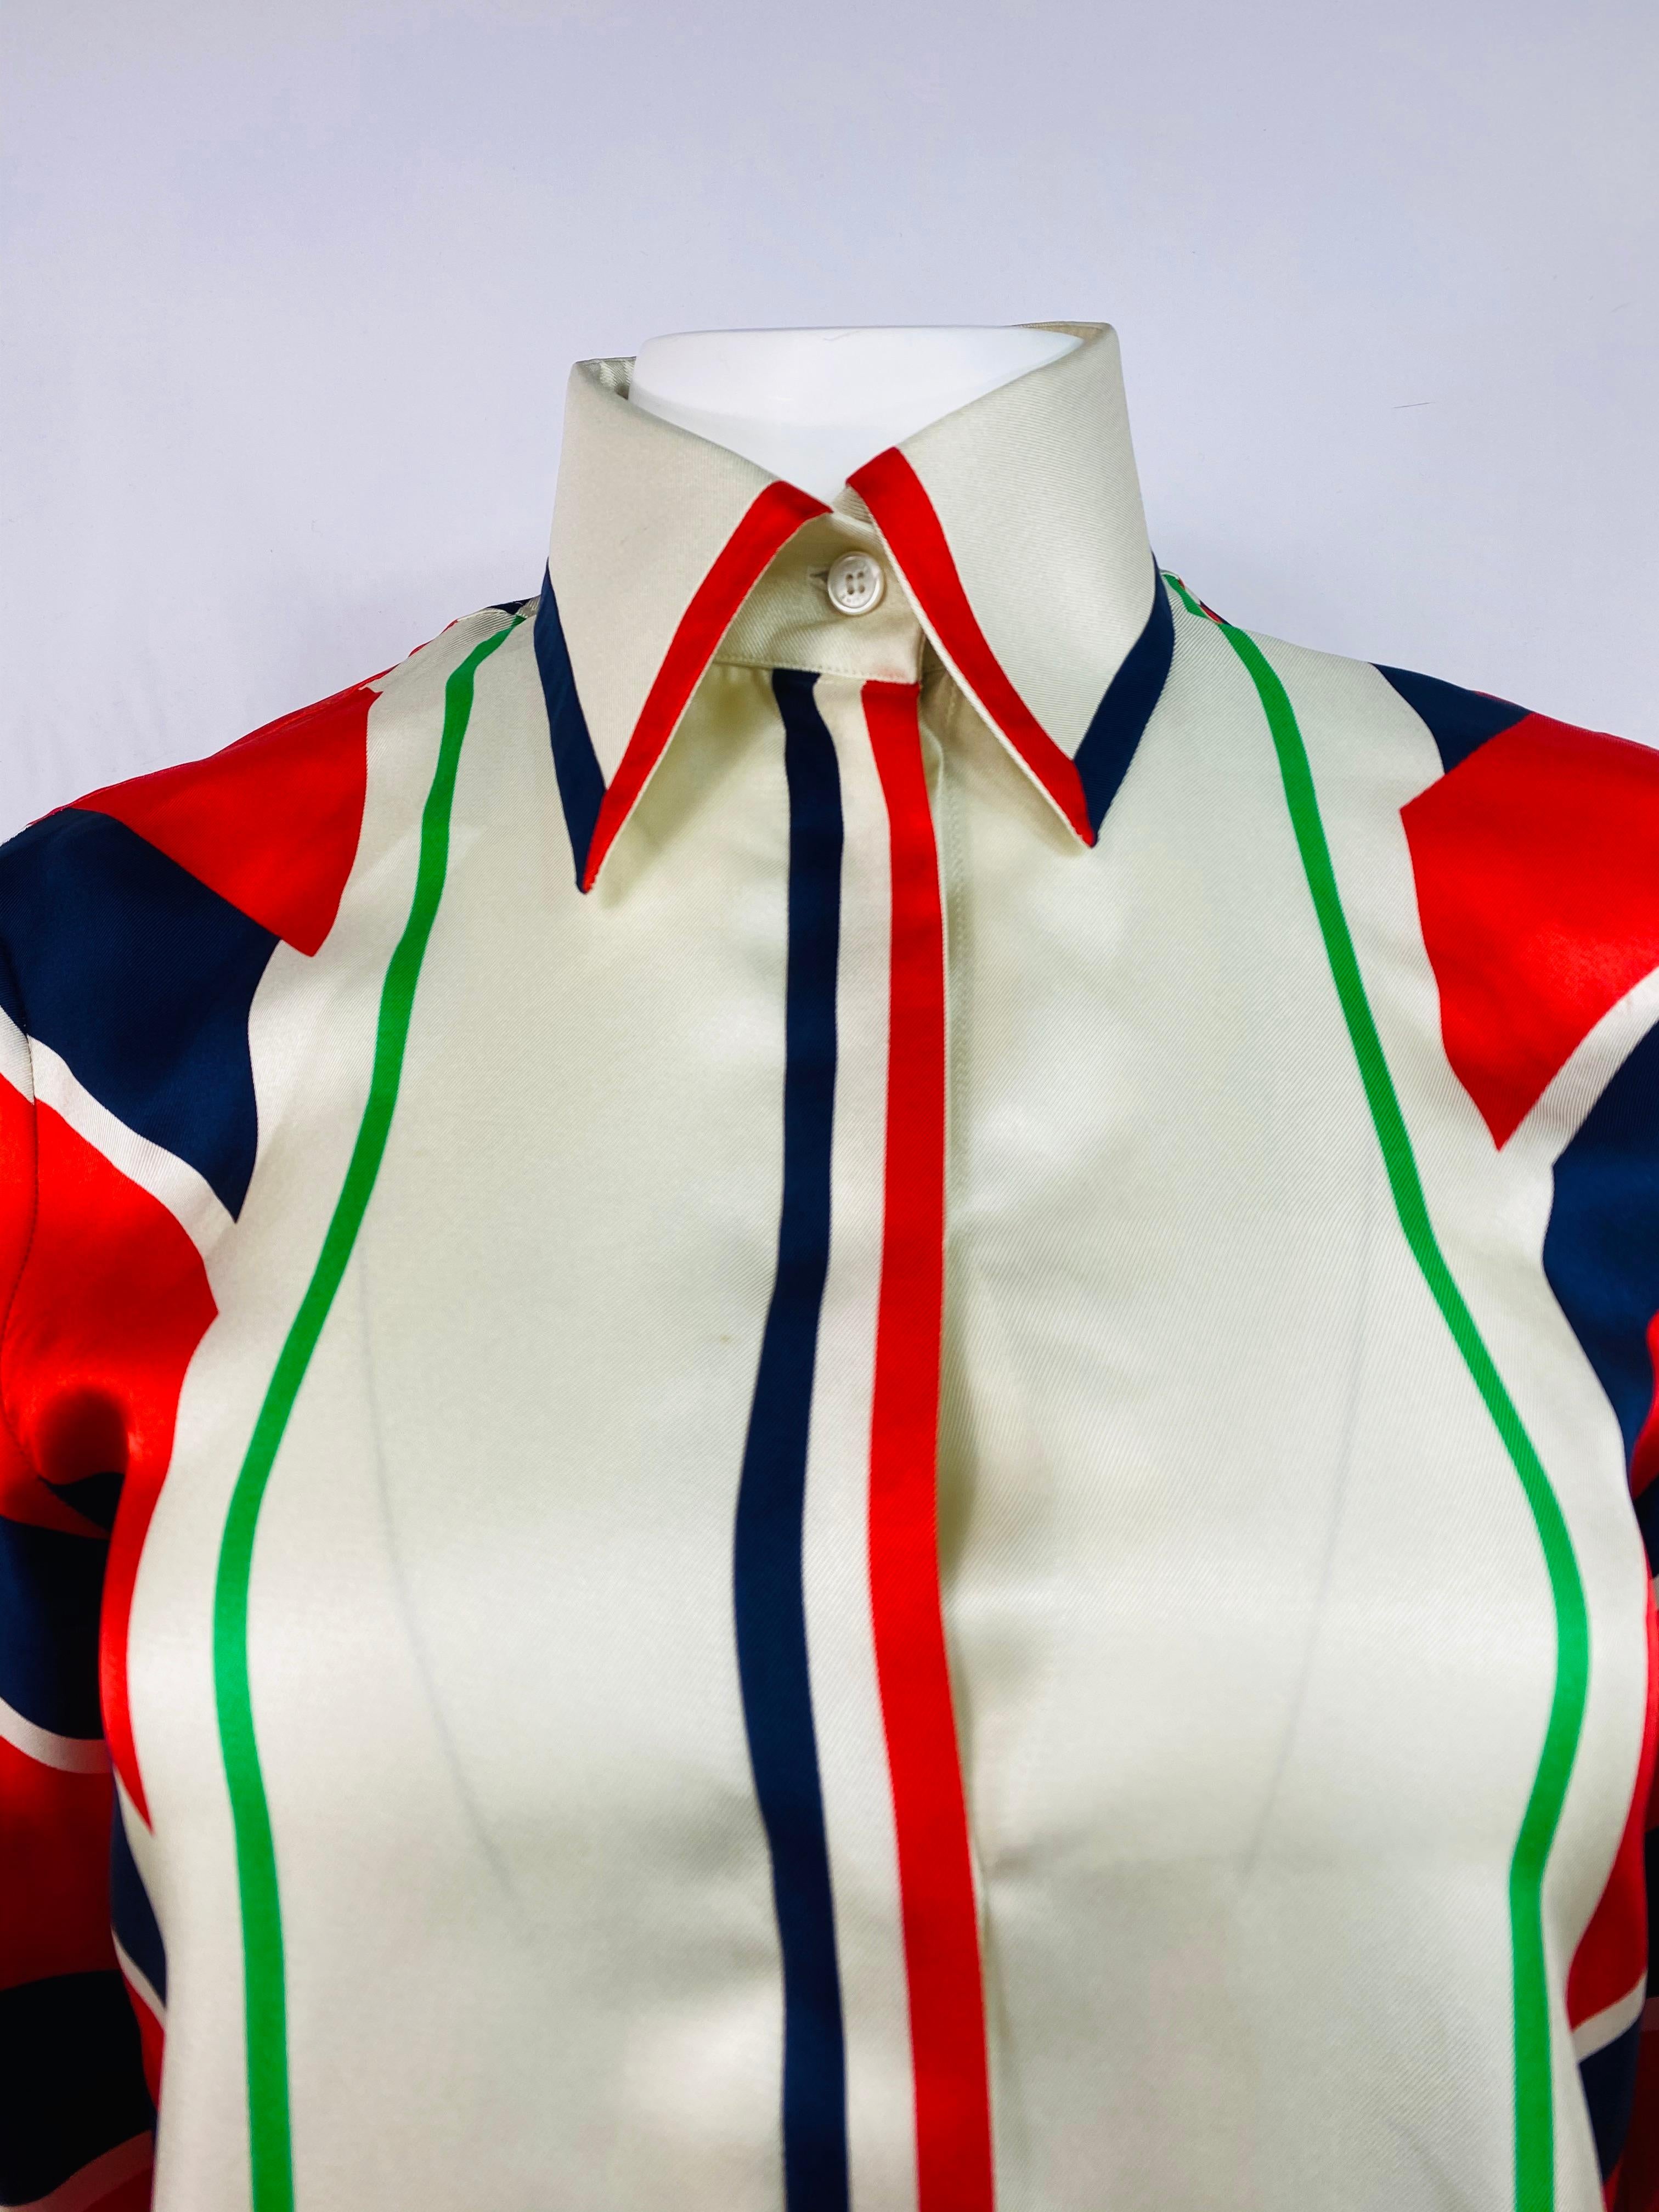 Product details:

Featuring cream, red, blue and green geometric/ striped print button down silk shirt/ blouse with long sleeves and color detail. 